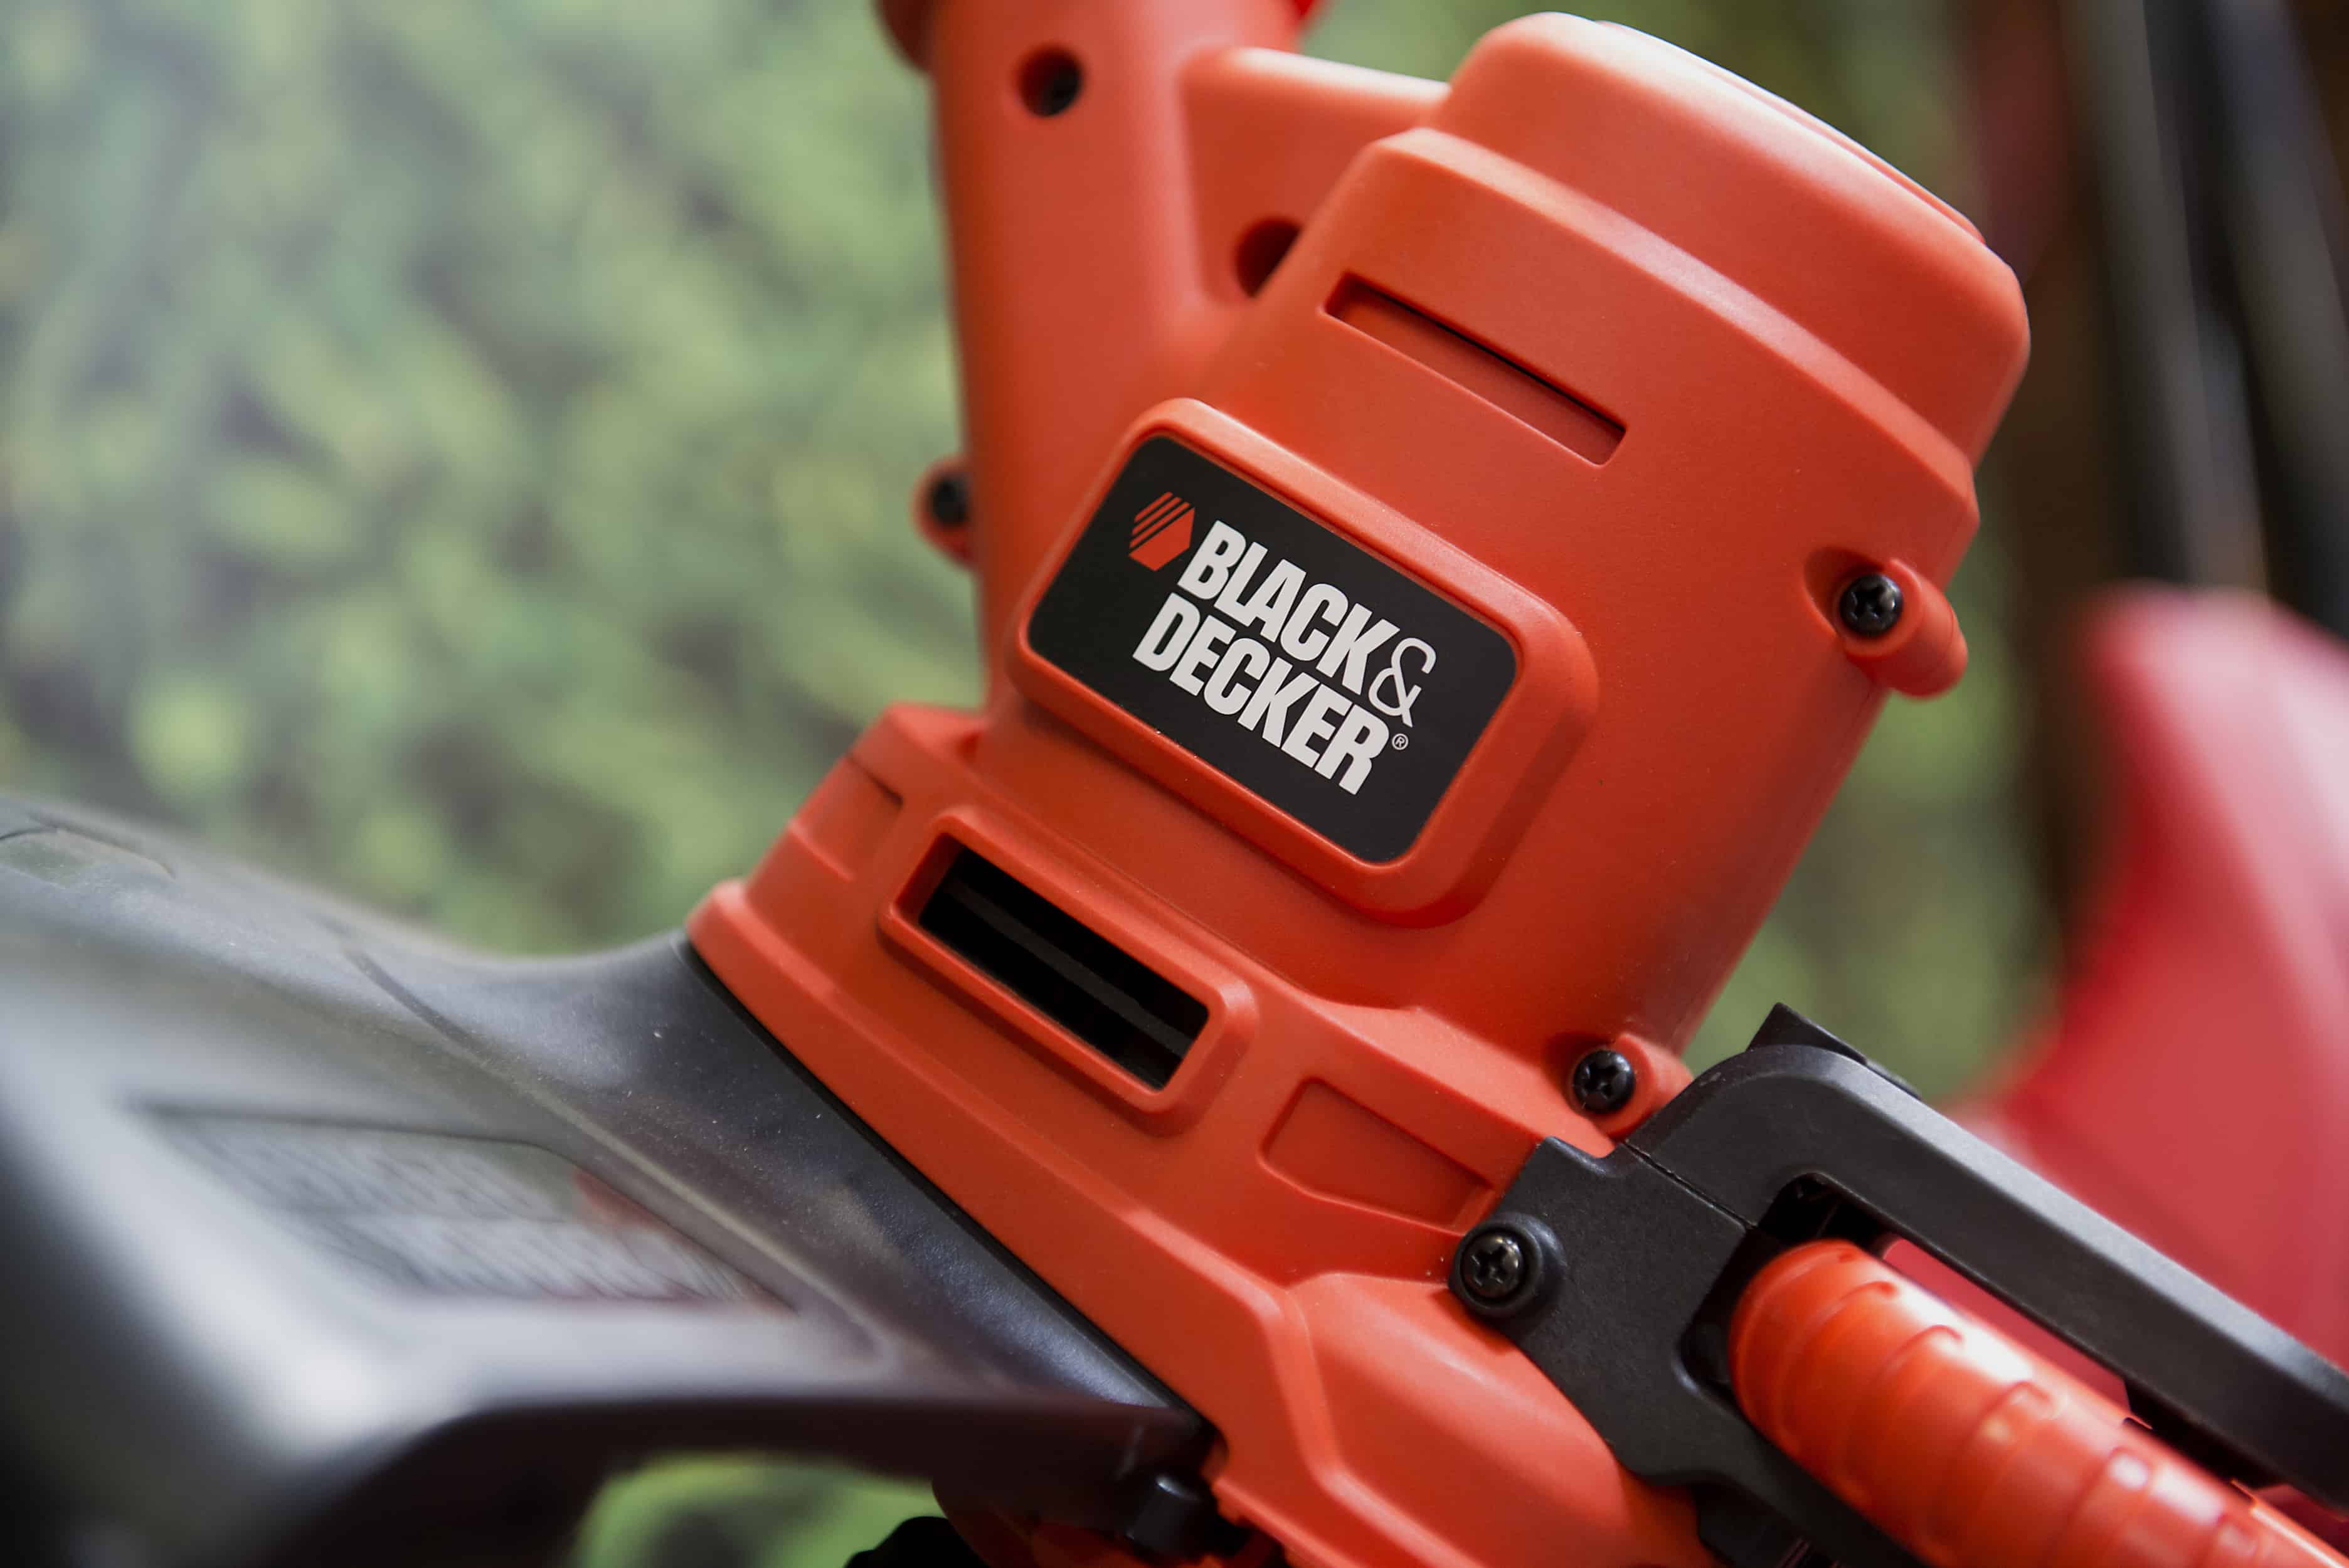 Stanley Black & Decker Mergers and Acquisitions Summary